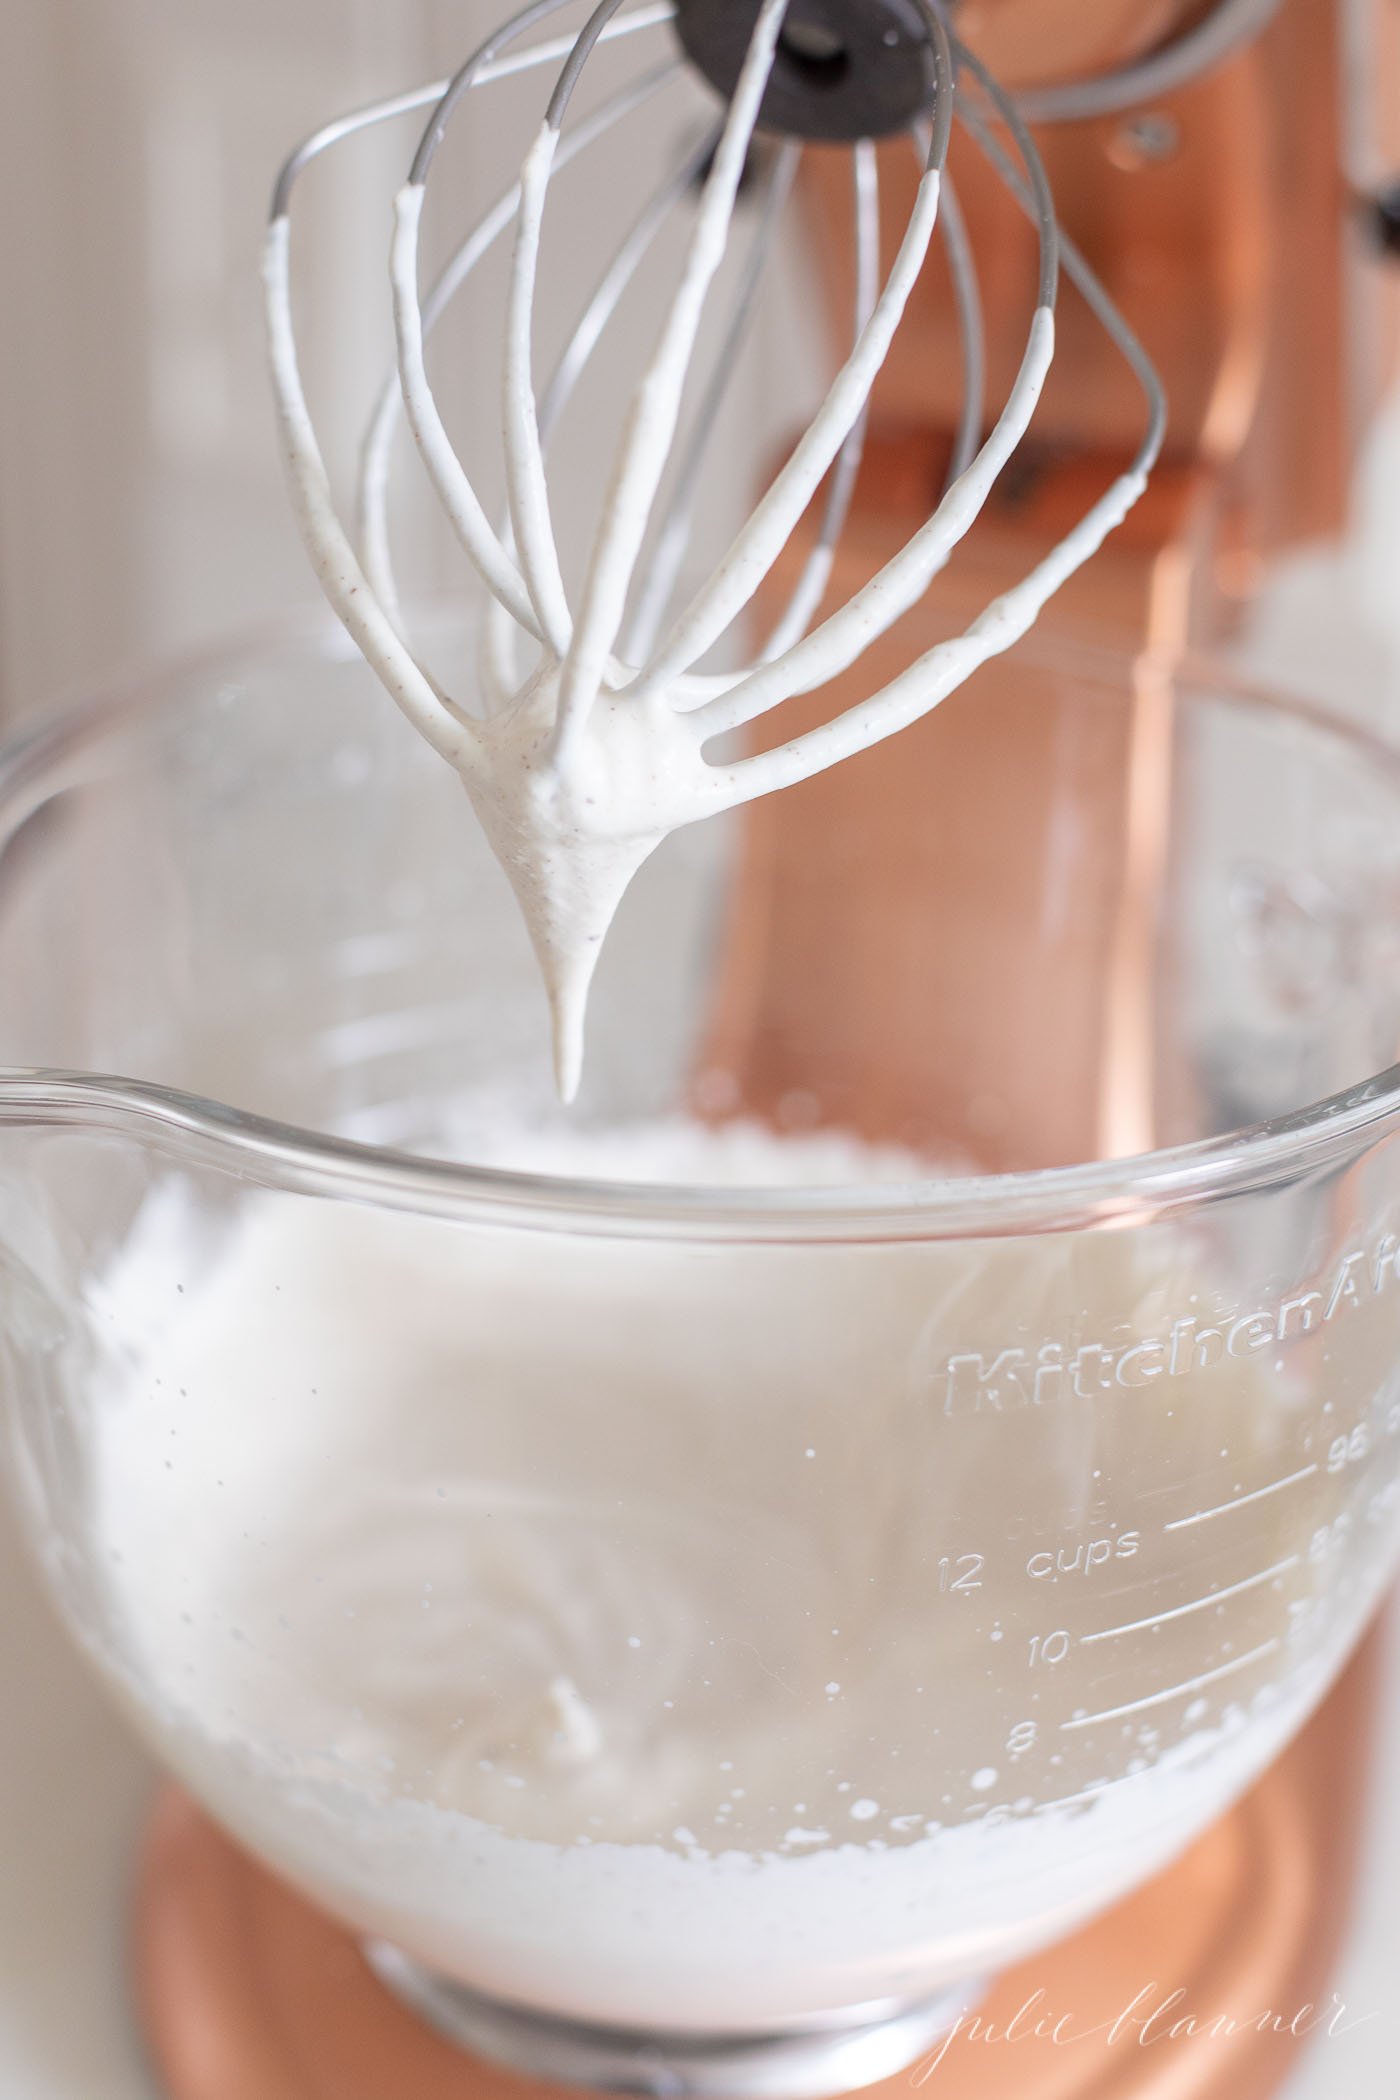 Eggnog whipped cream in the glass bowl of a copper stand mixer.